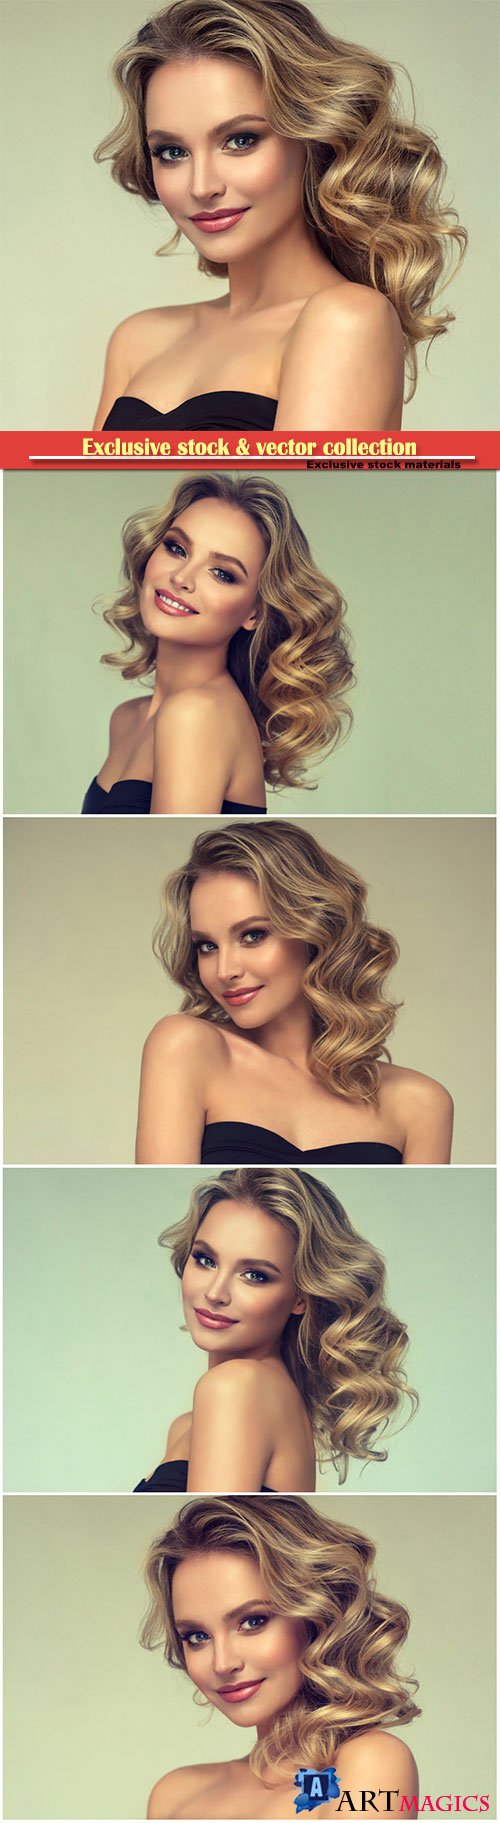 Pretty blond-haired model with middle length curly, loose hairstyle and attractive makeup